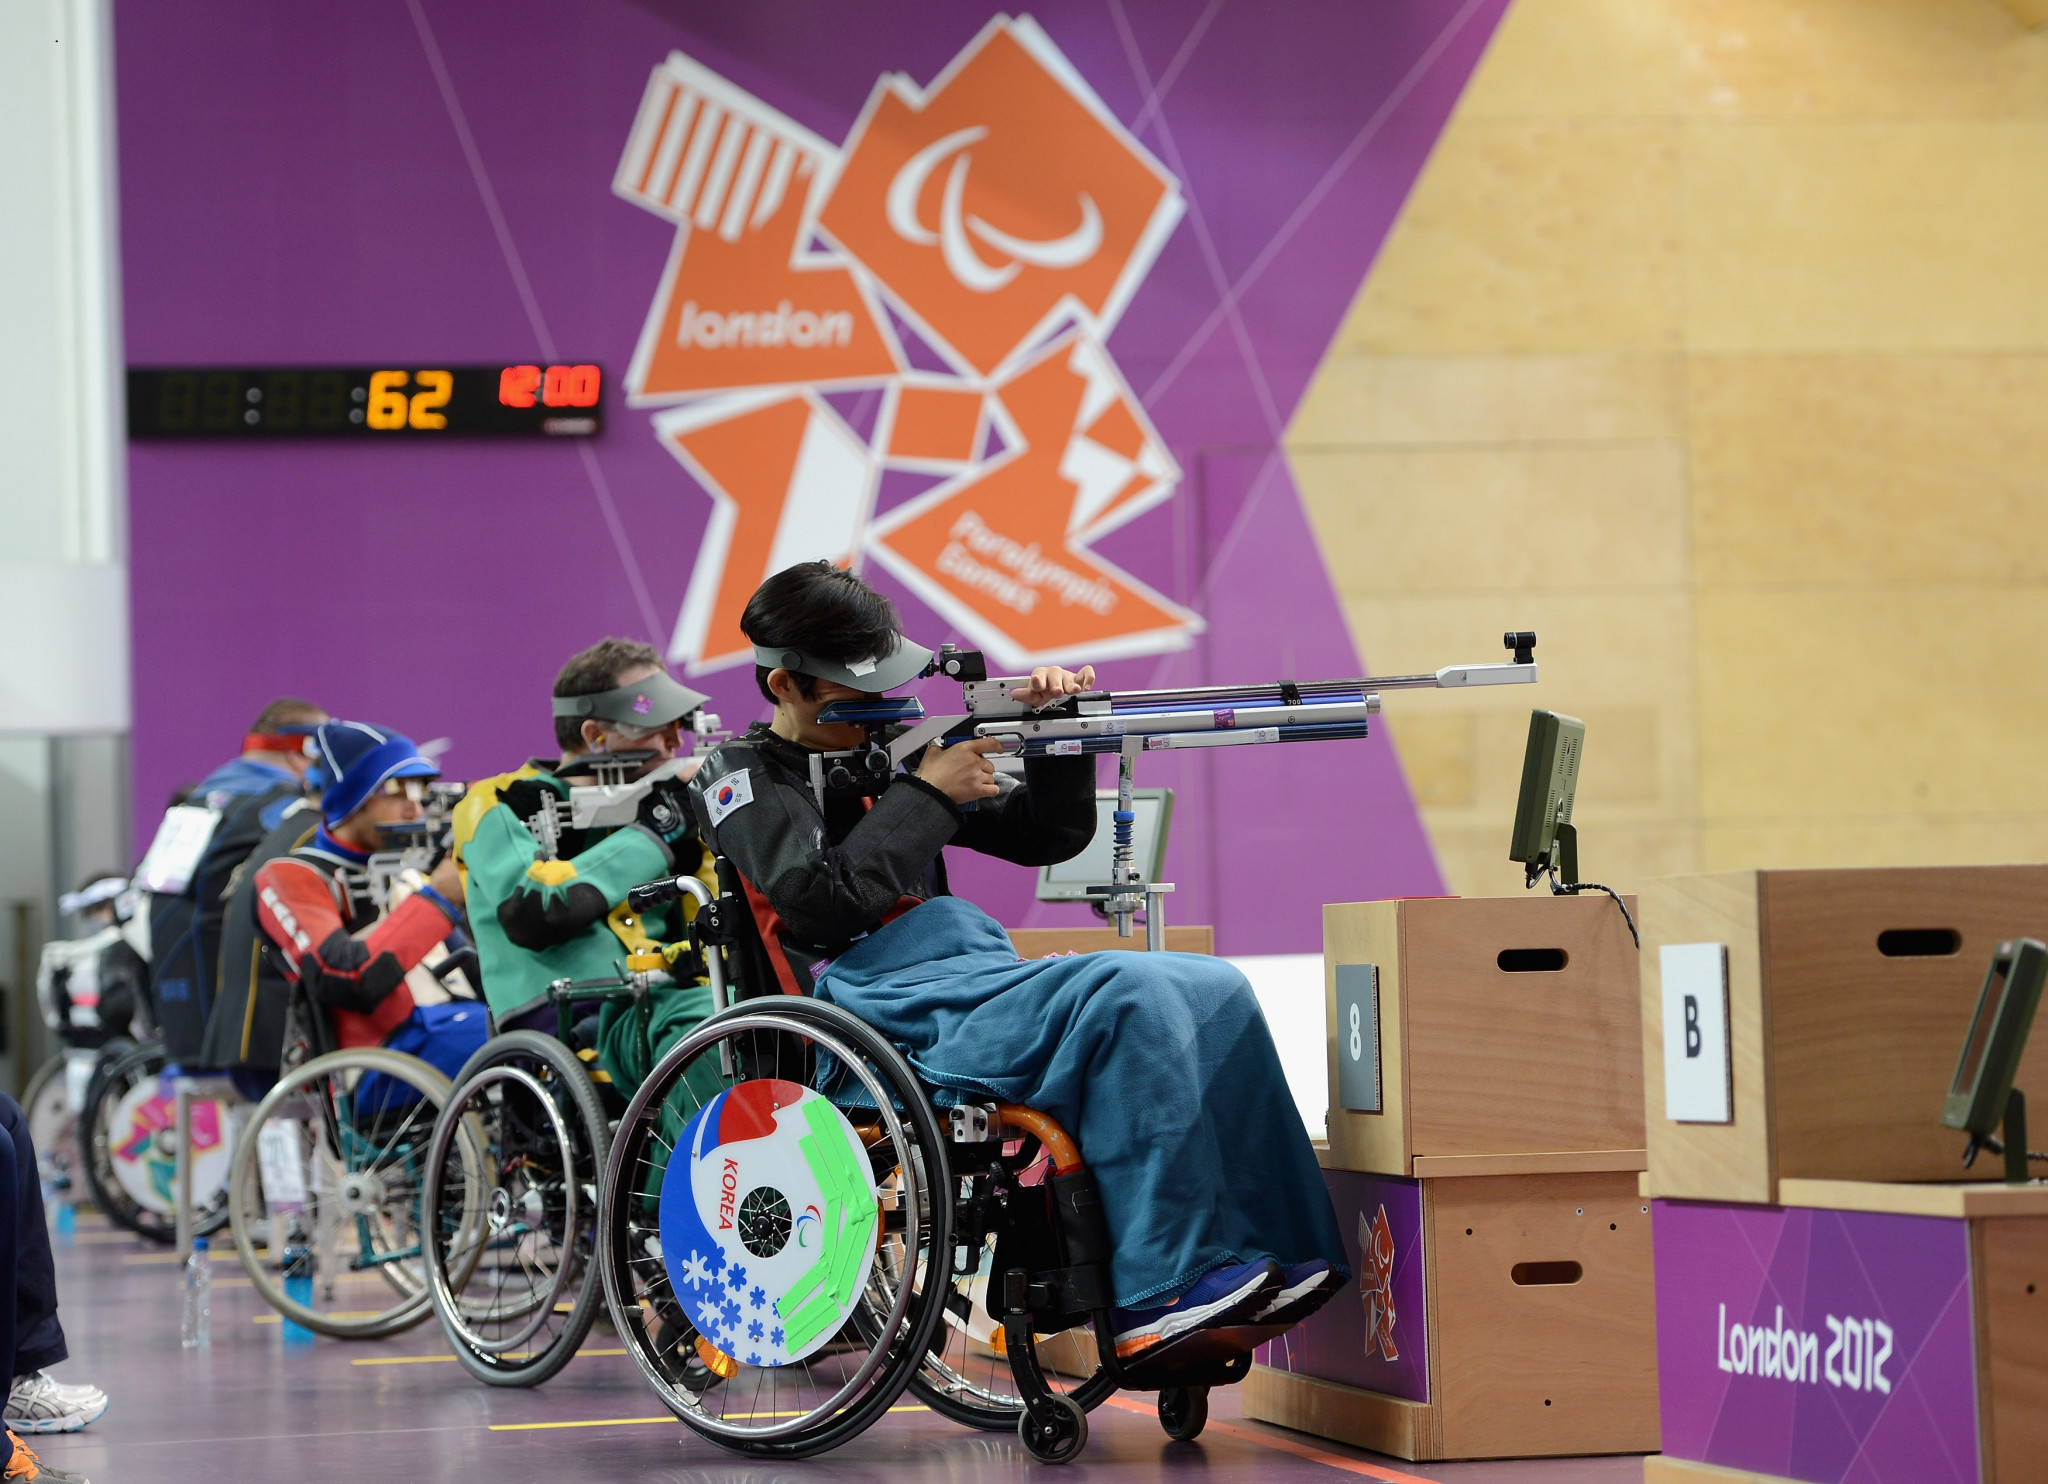 Jeon Youngjun, pictured here competing during the London 2012 Paralympic Games, broke a world record today at the World Shooting Para Sport World Cup in Bangkok ©Getty Images